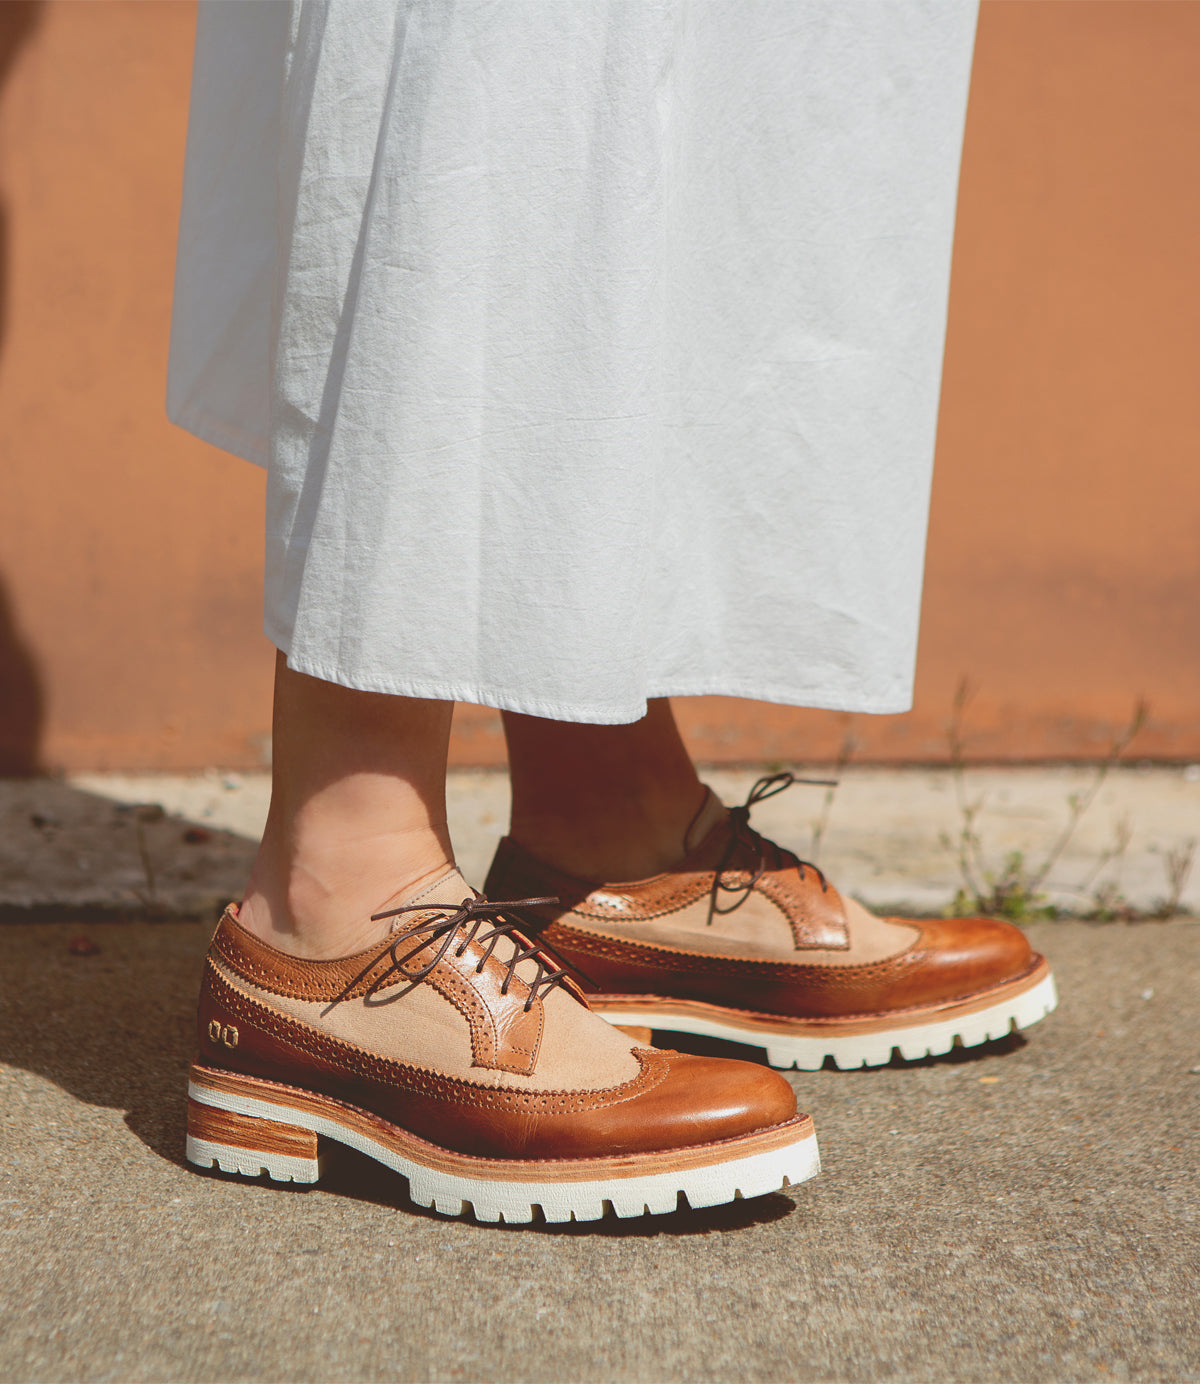 A person standing in Bed Stu Lita K III platform shoes, embodying 90’s fashion, paired with a white skirt against an orange wall.